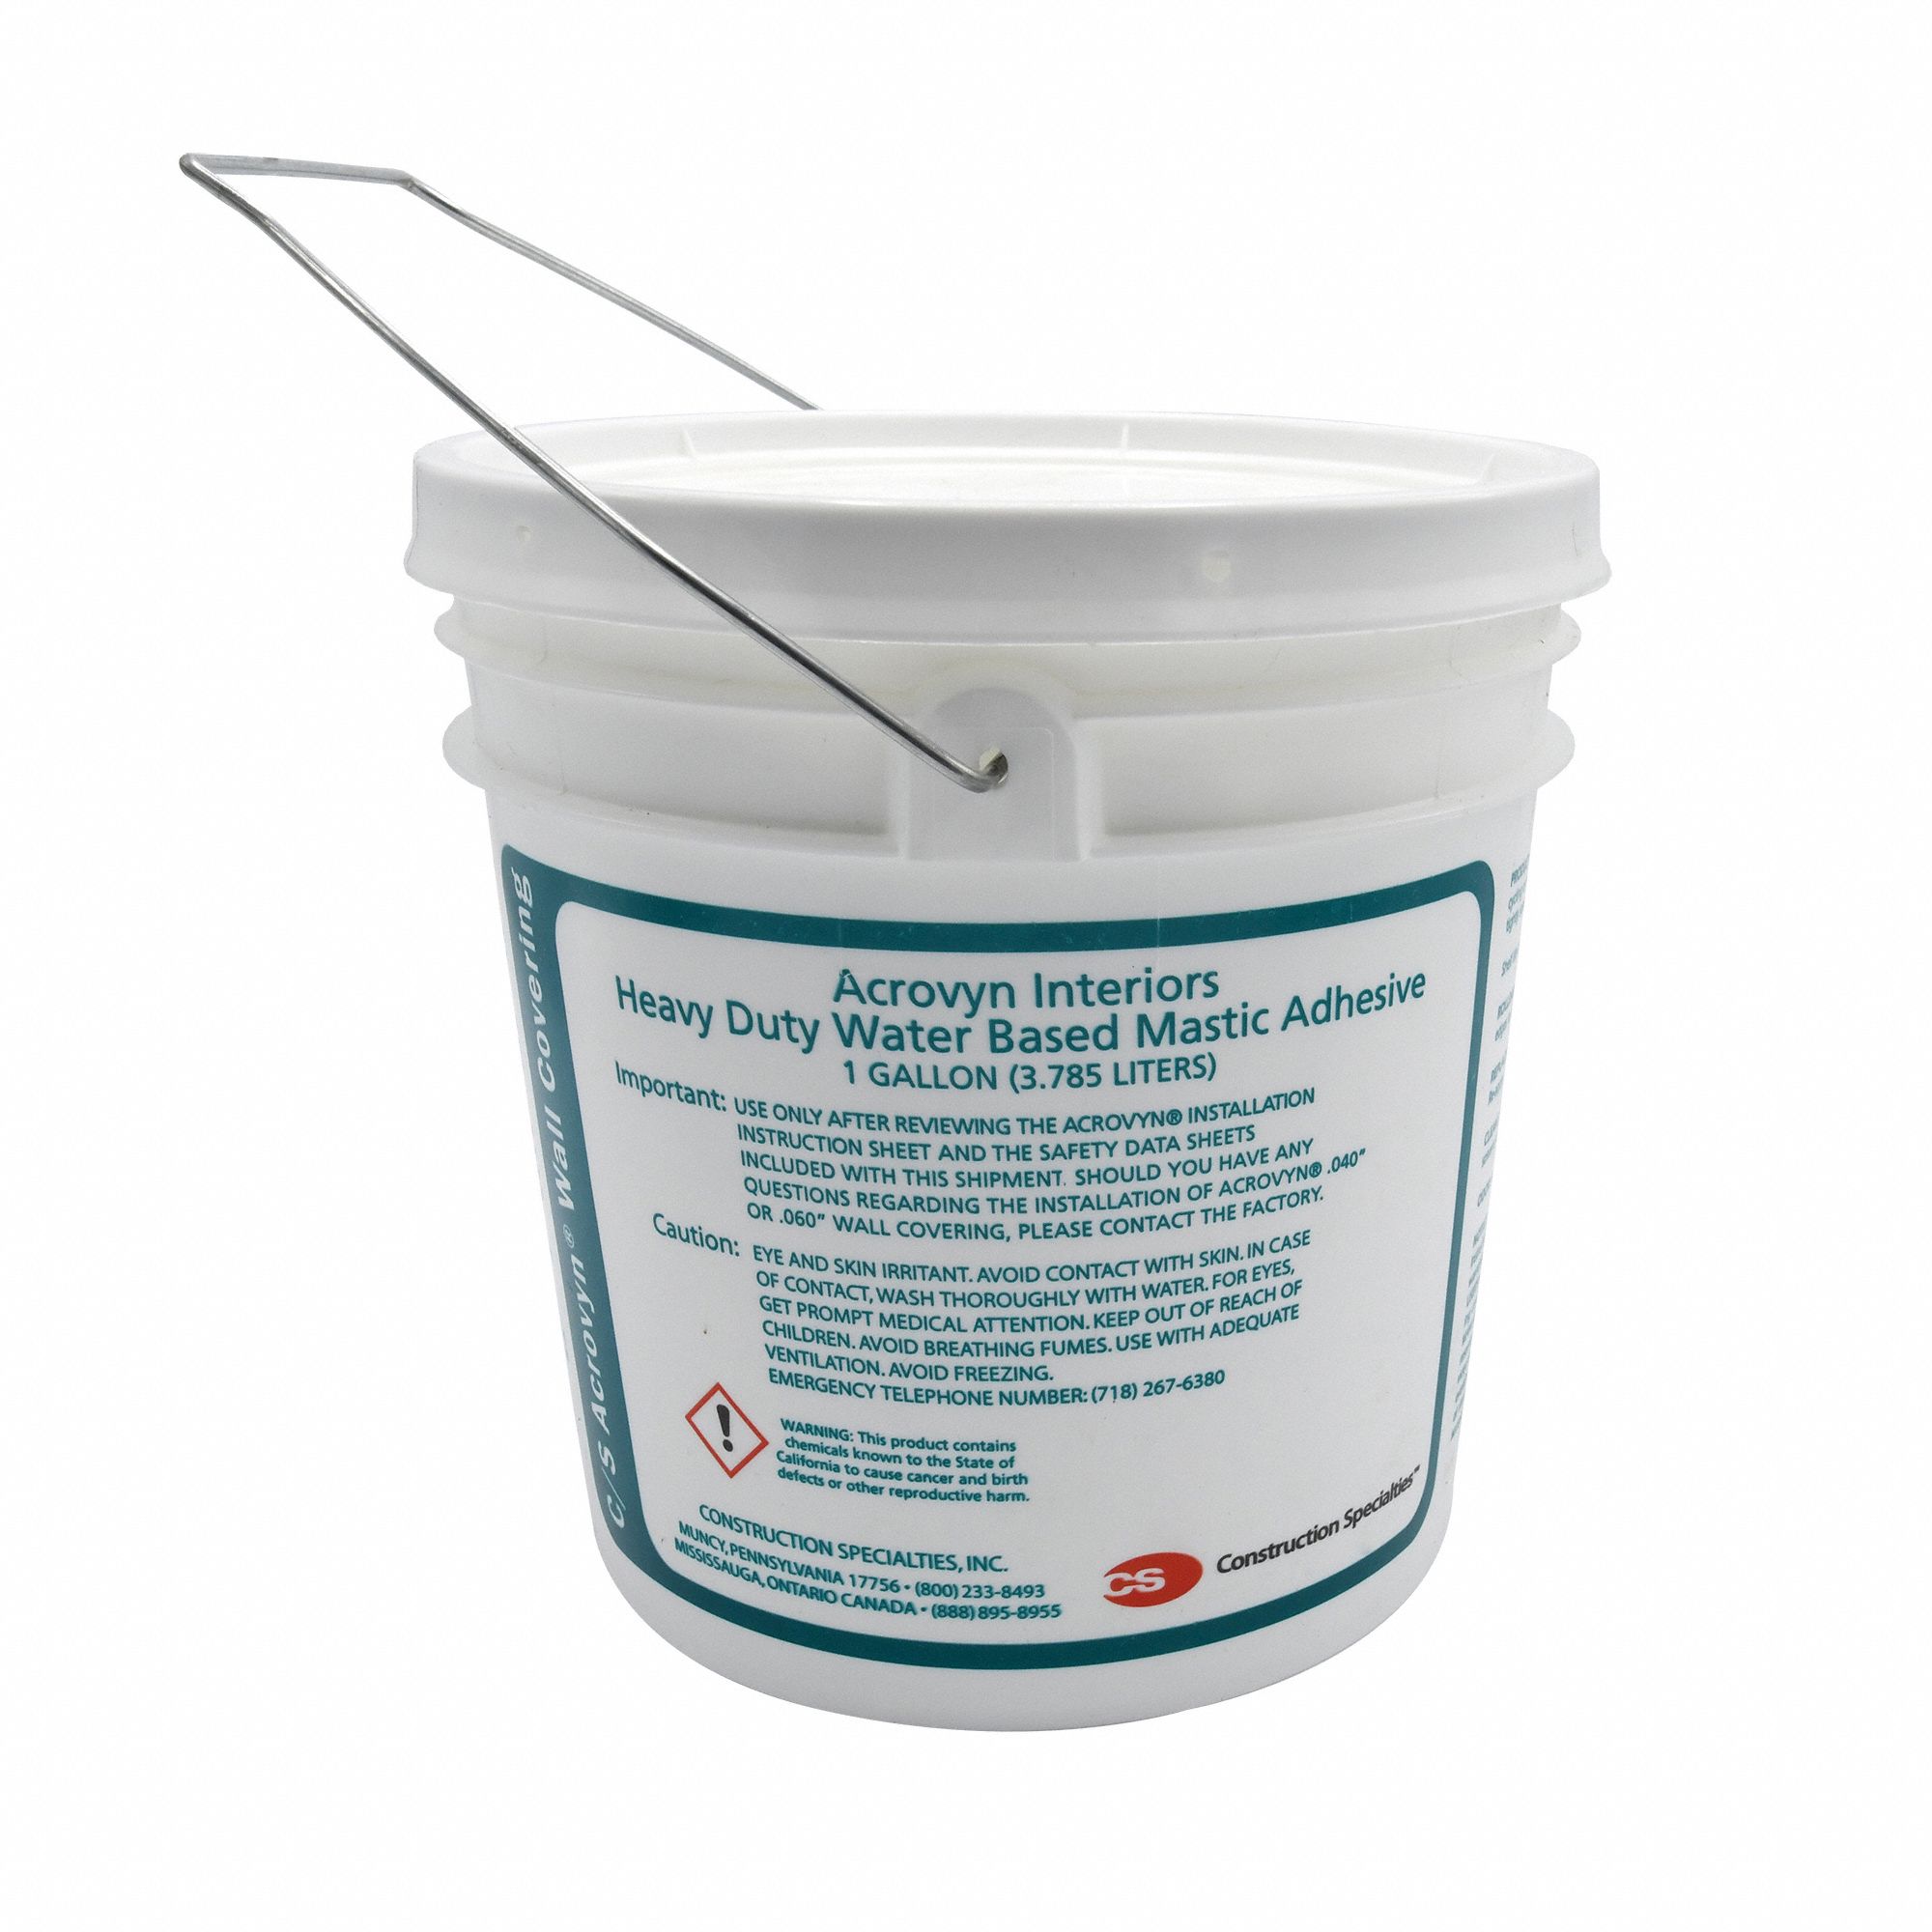 ACROVYN, White, Interiors Heavy Duty Water Based Mastic Adhesive -  55LE64